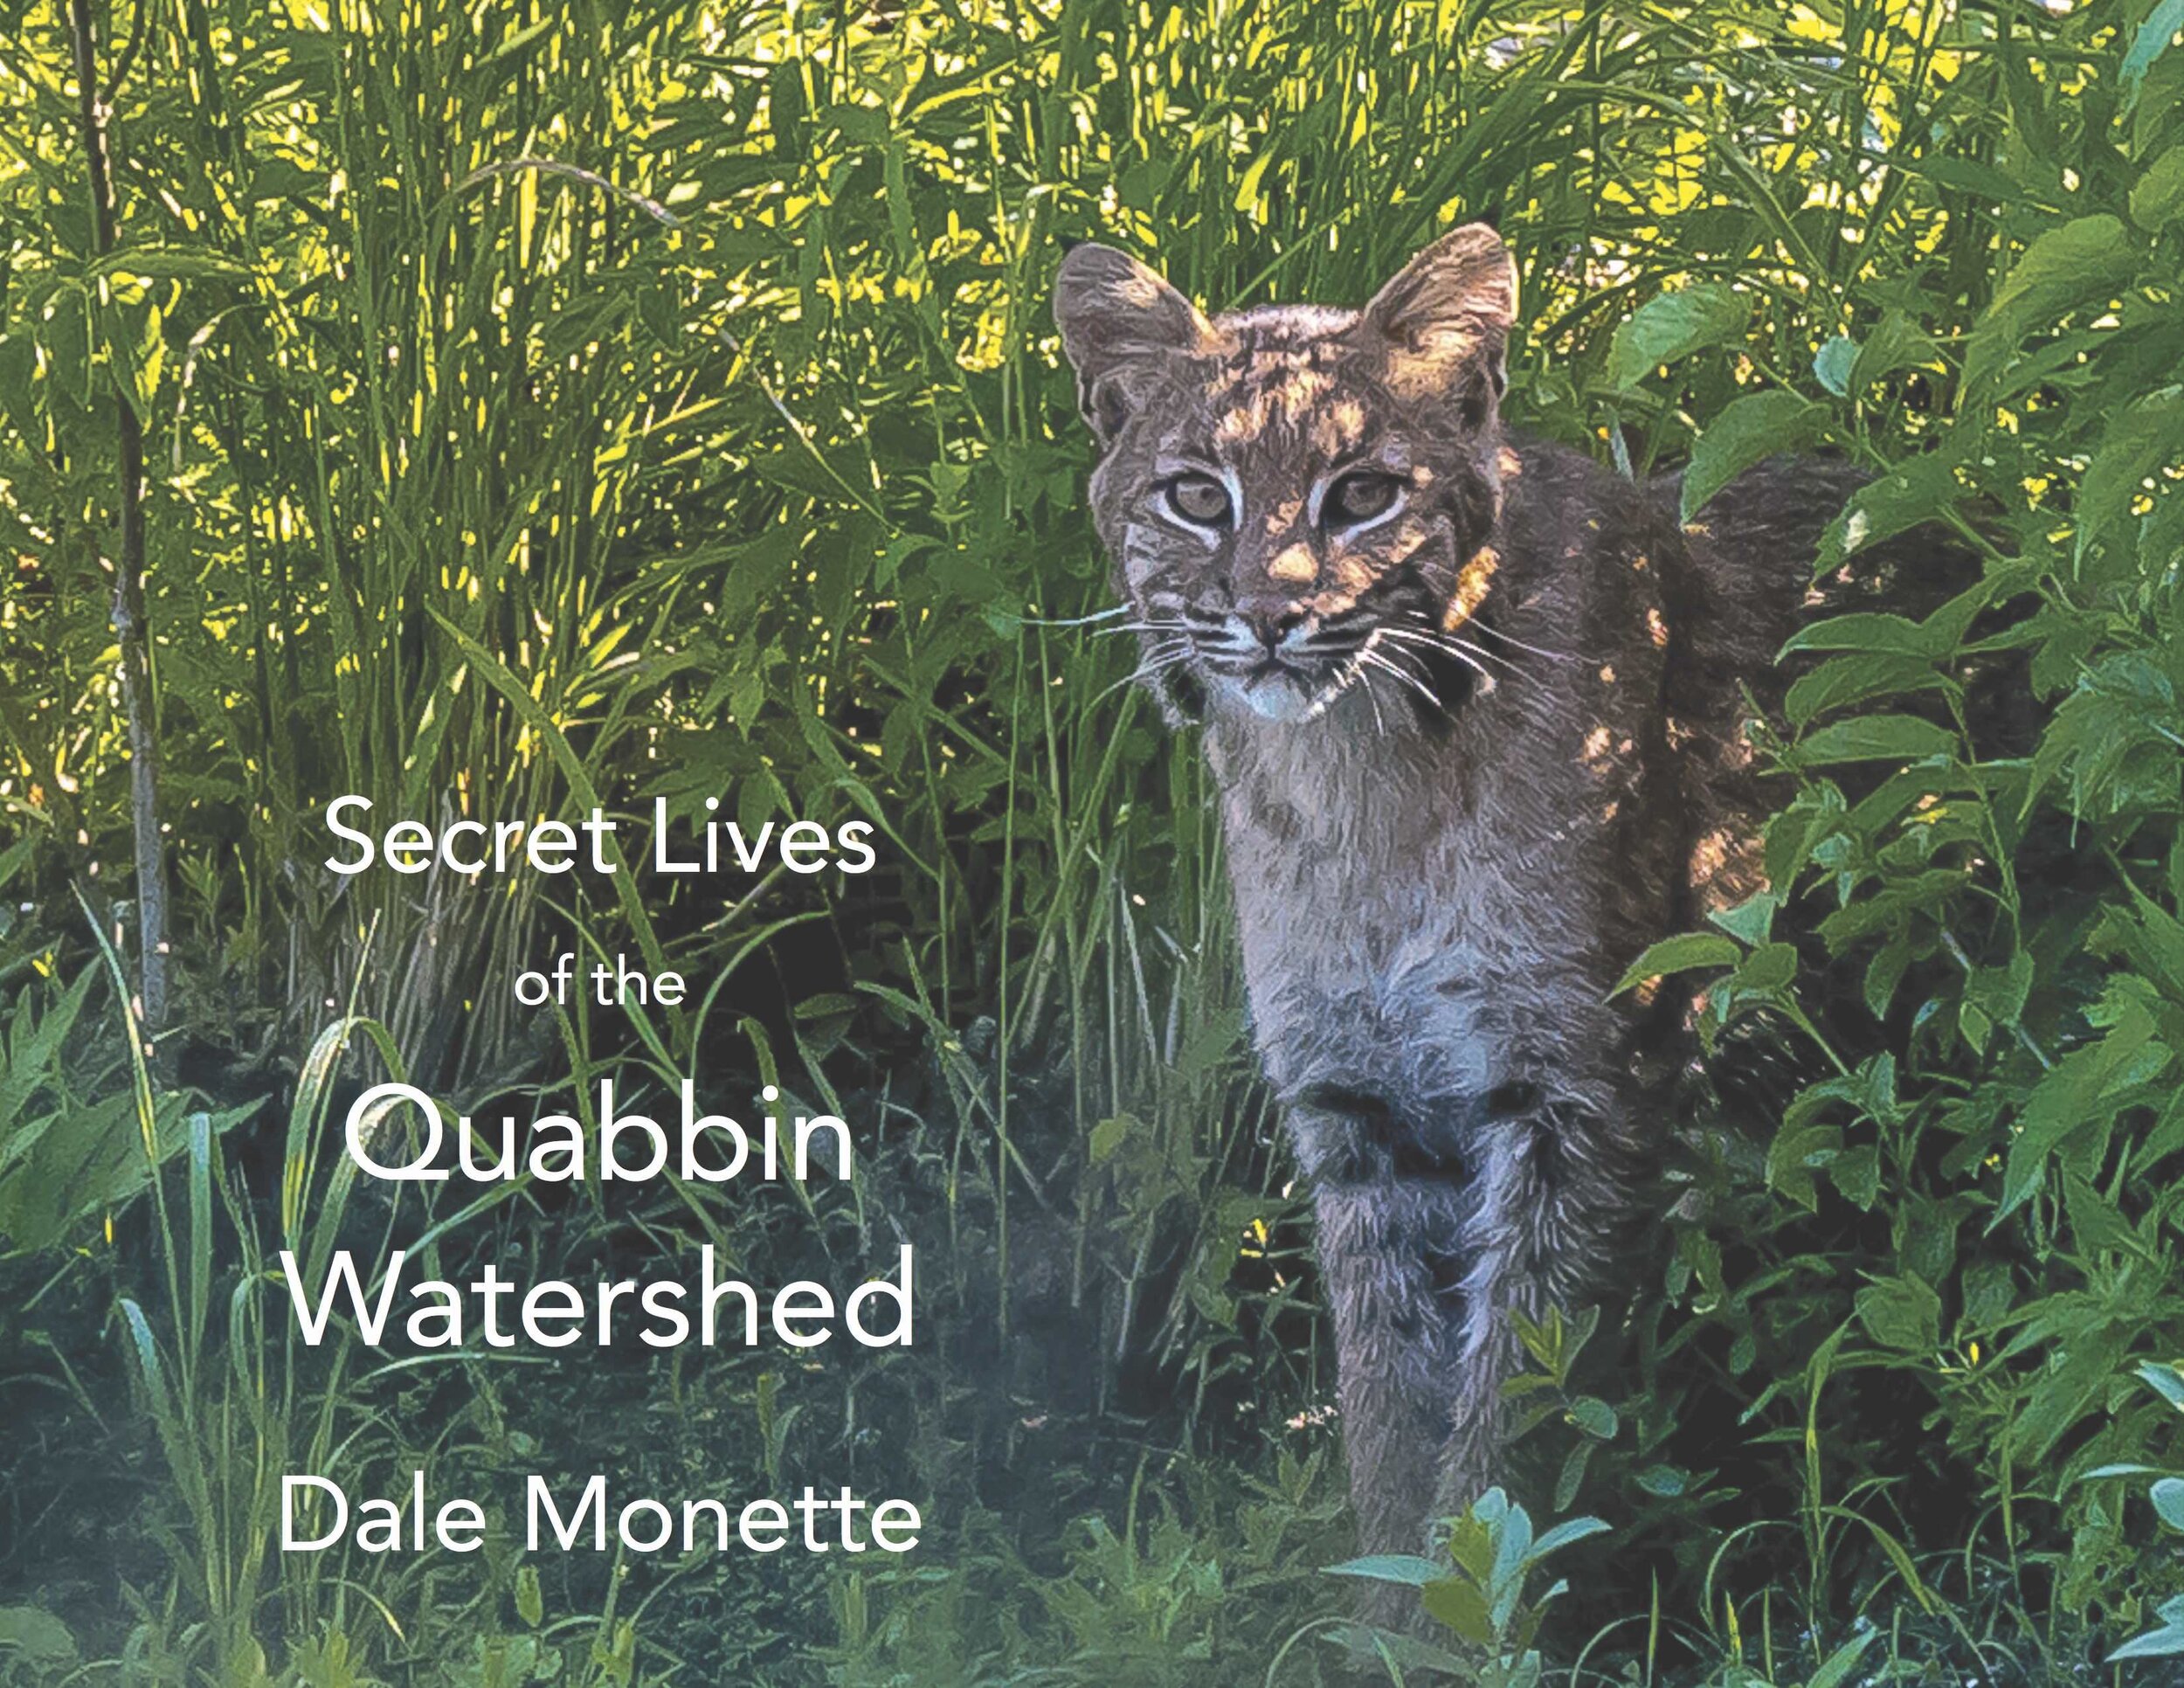   The Secret Lives of The Quabbin Watershed is a book that took a total of 4 years of my life to produce. The Quabbin Reservoir is a man made reservoir that is approximately 87,000 acres in size and supplies clean, unfiltered drinking water to 48 com